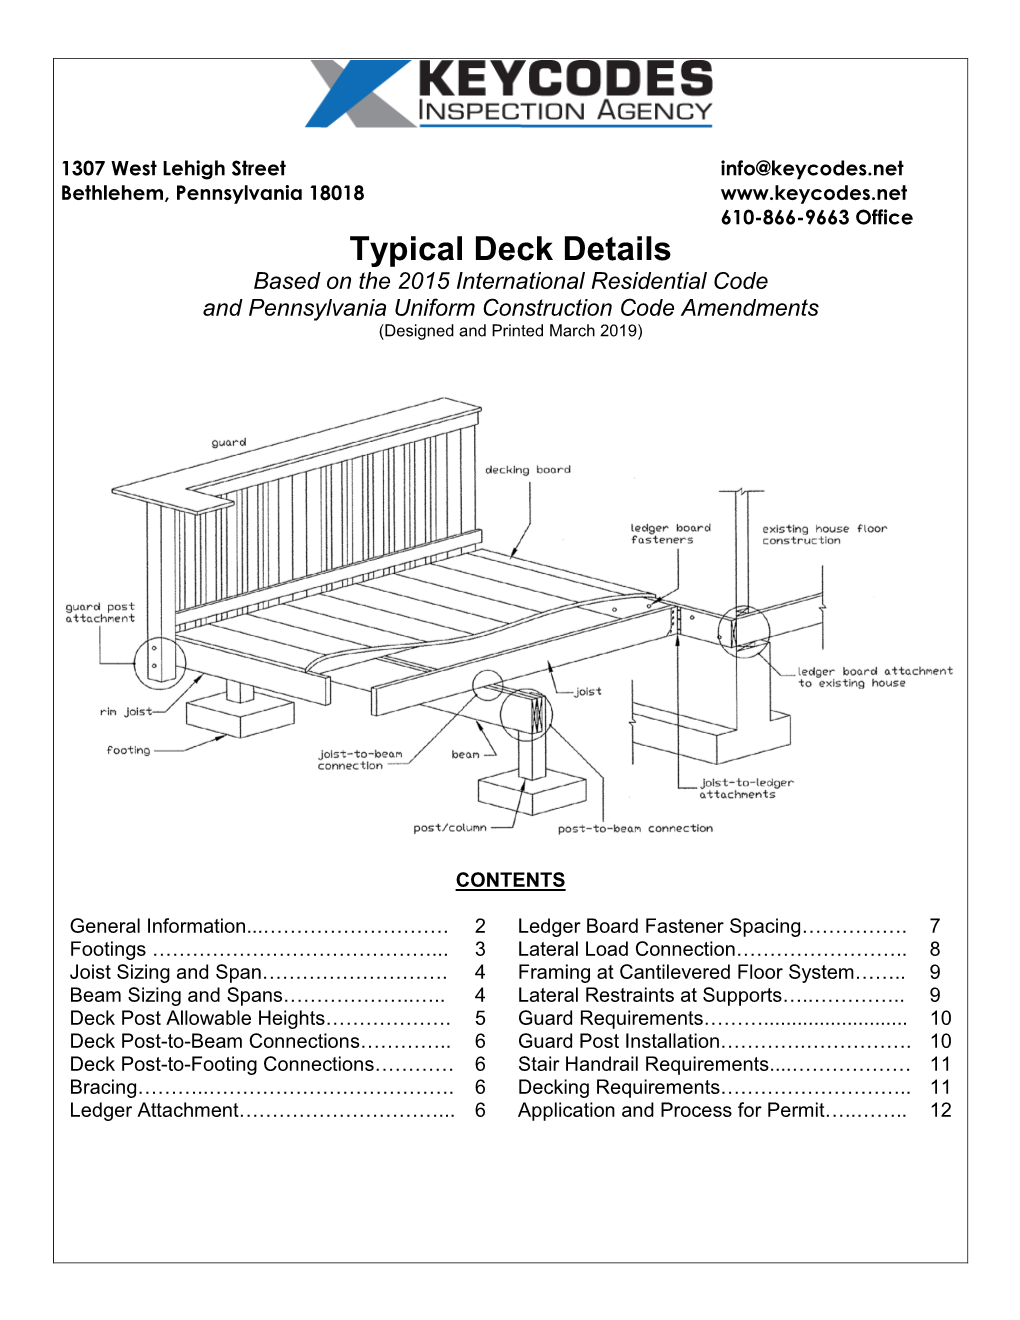 Deck Details Based on the 2015 International Residential Code and Pennsylvania Uniform Construction Code Amendments (Designed and Printed March 2019)